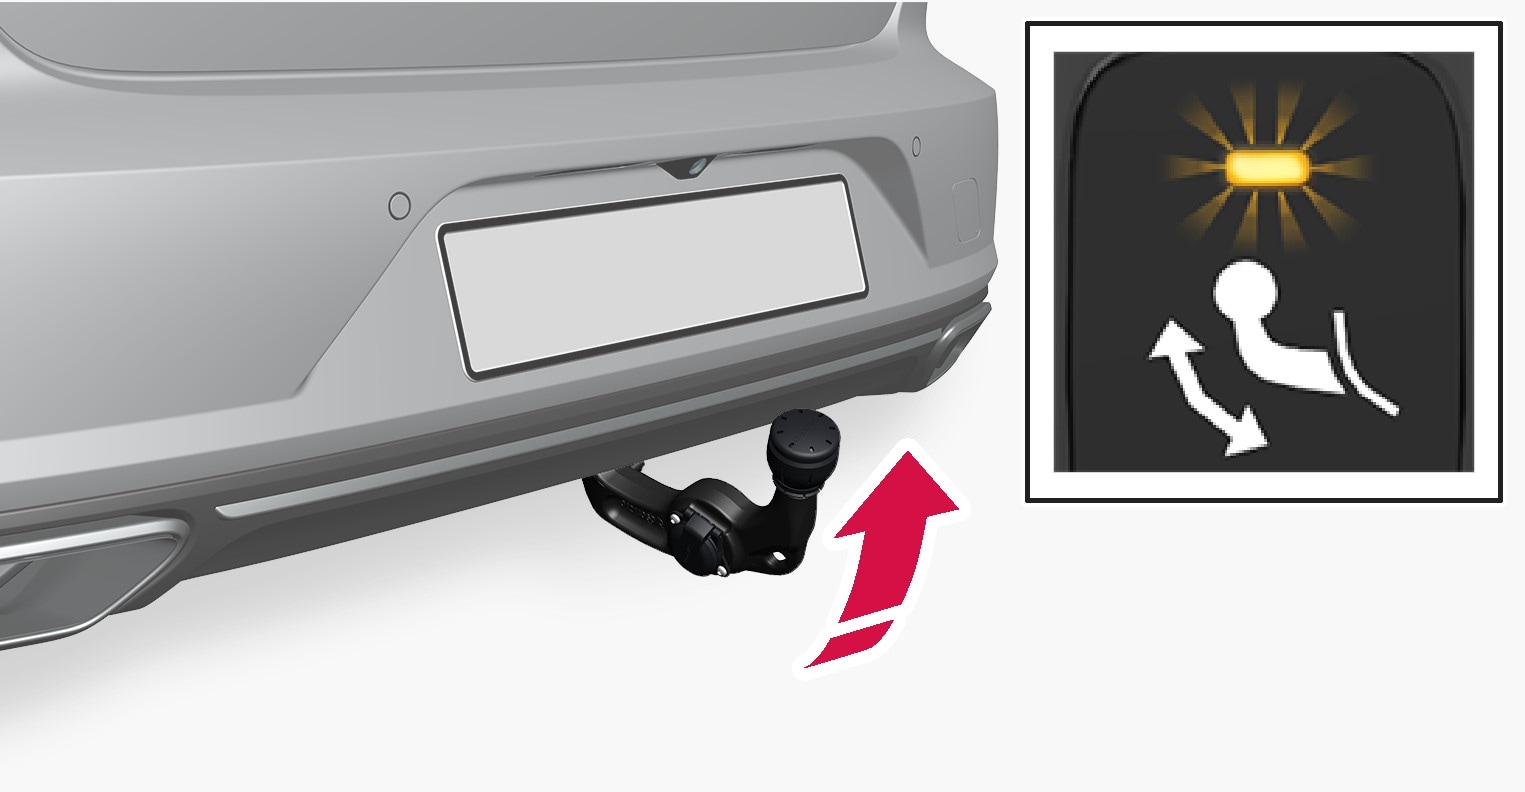 P5-1617-S90-V90-Swivable towbar and switch foldout step 2